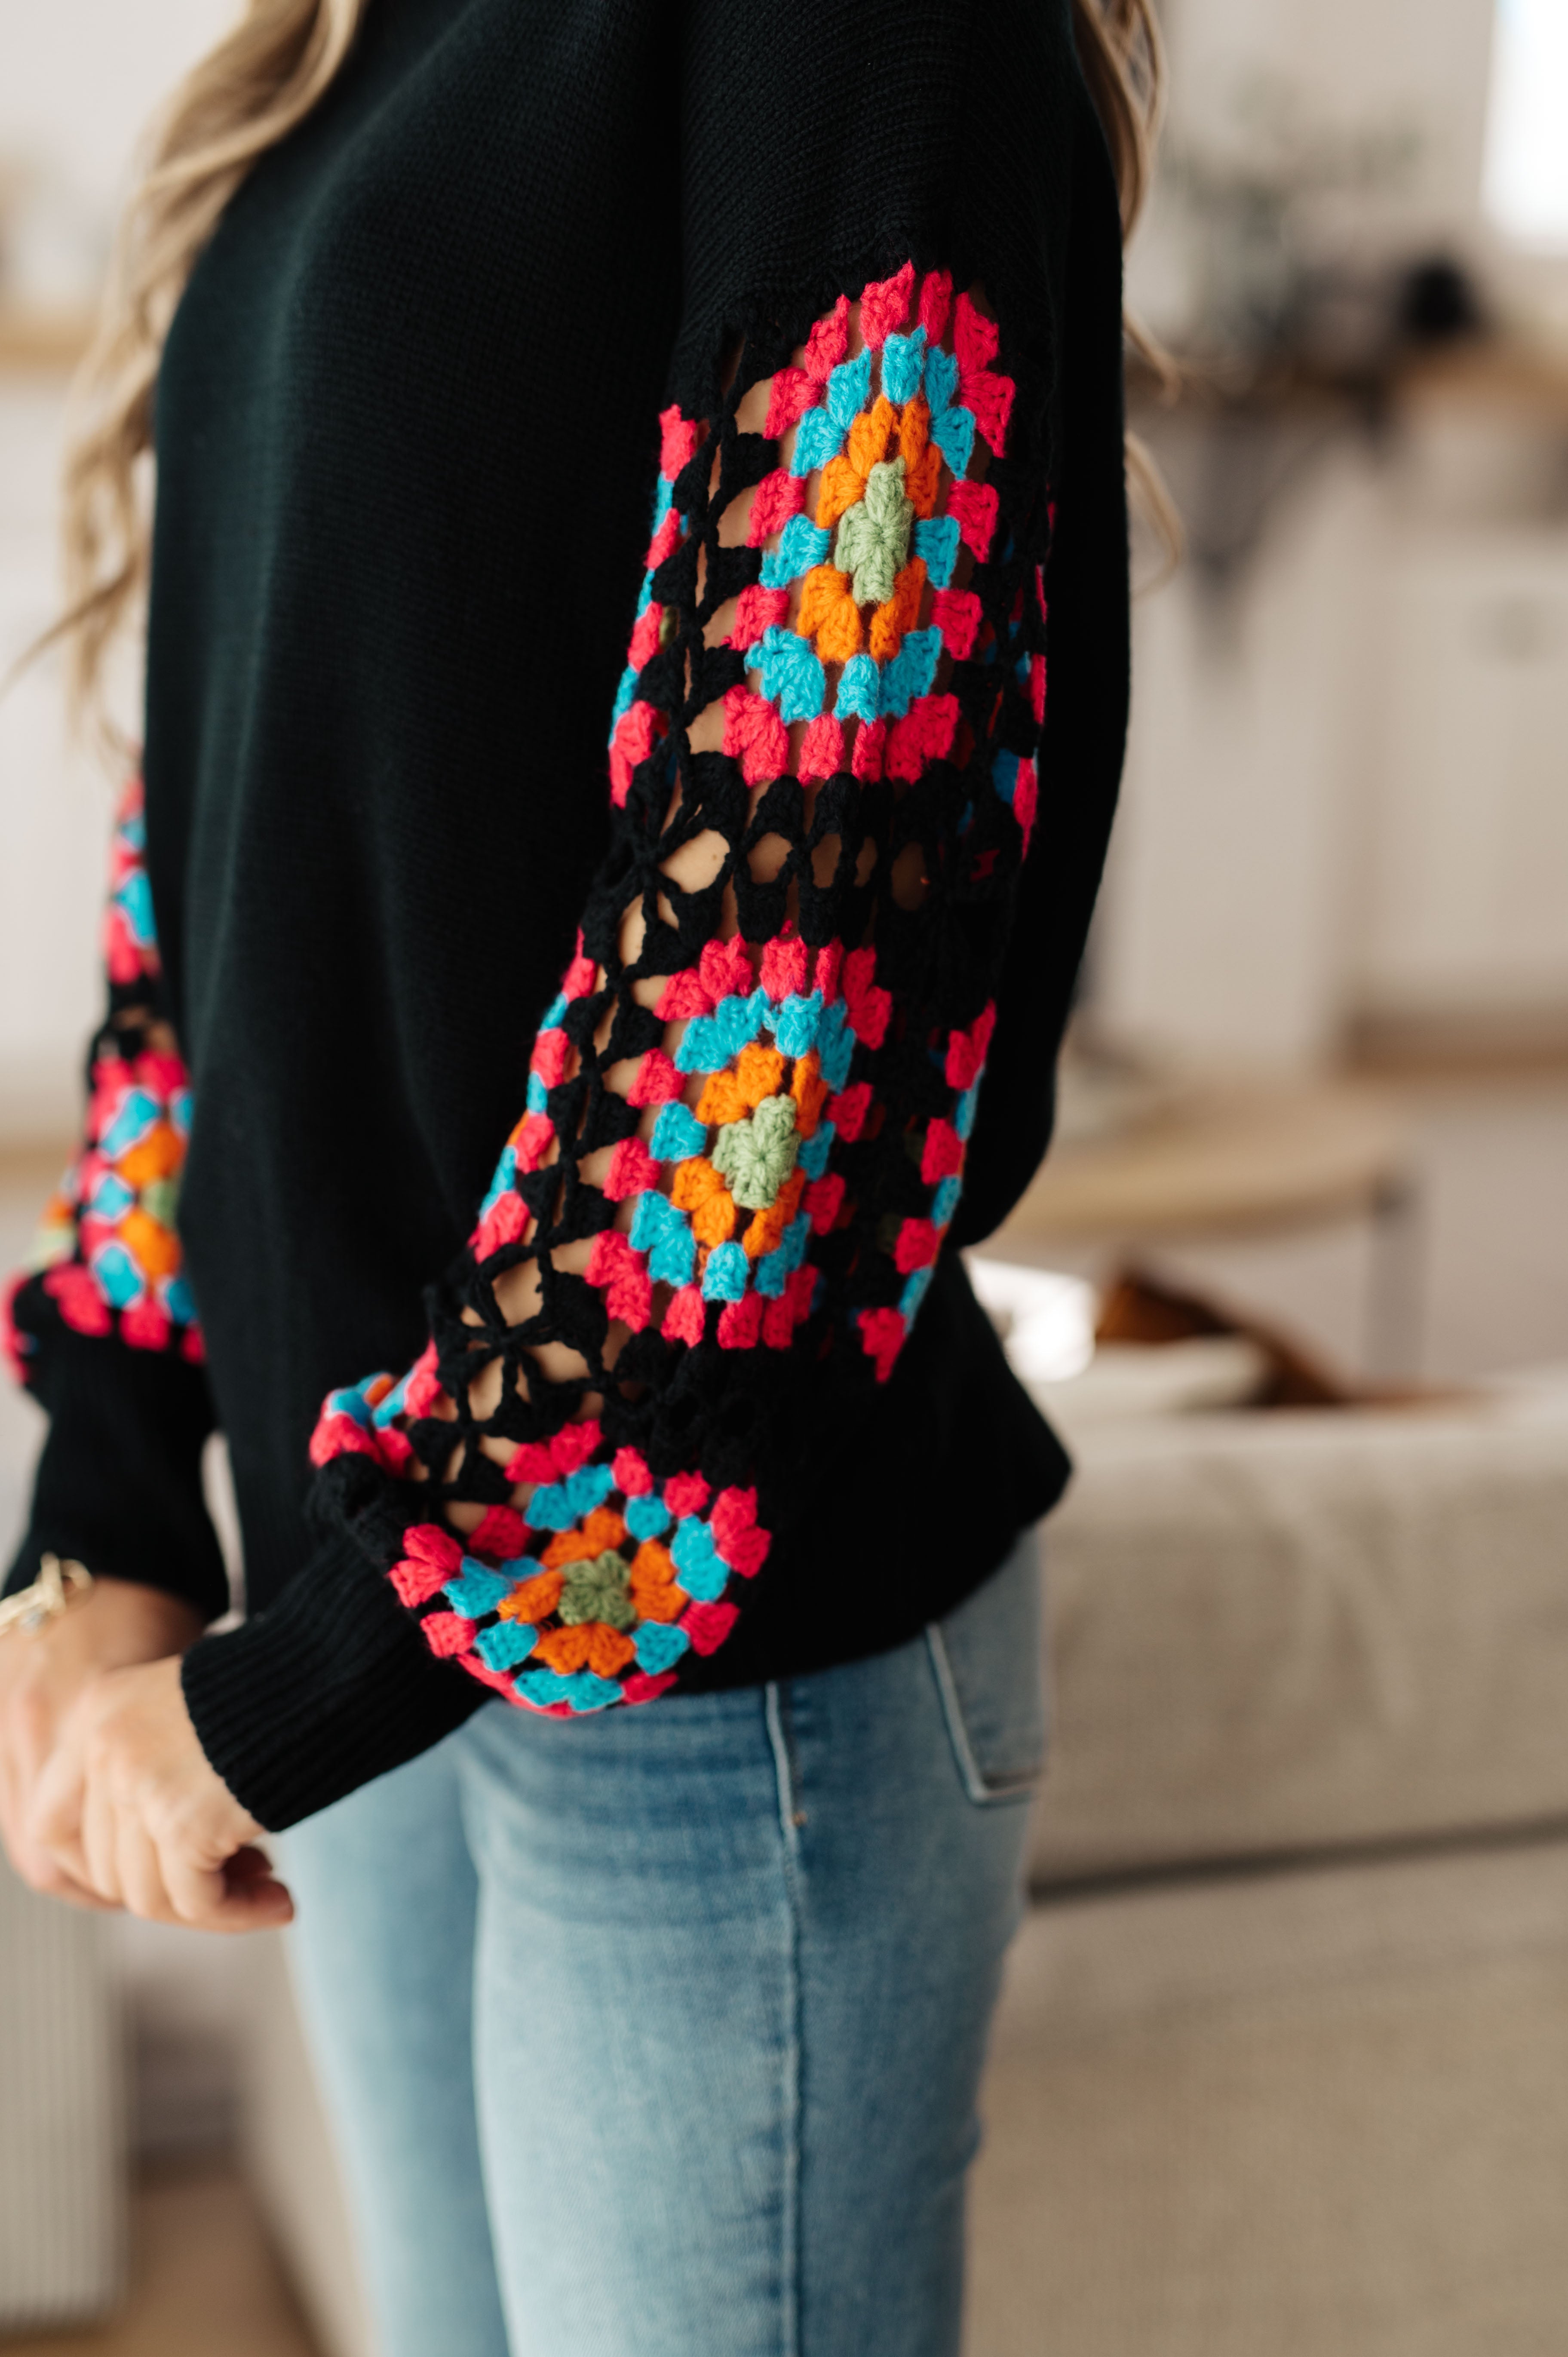 Granny Knows Best Crochet Accent Sweater